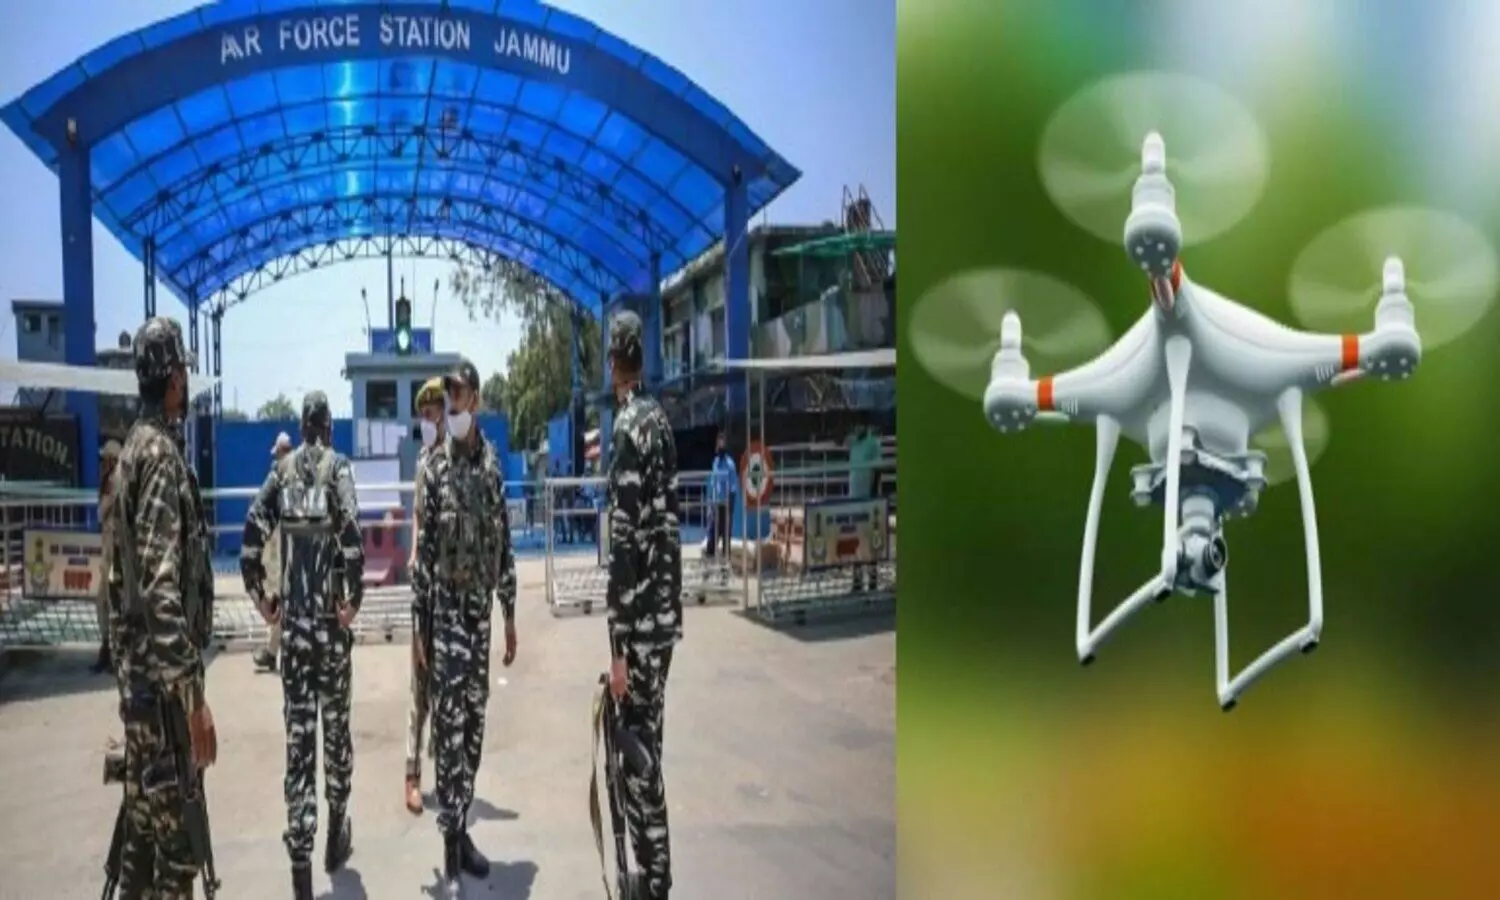 jammu drones spotted